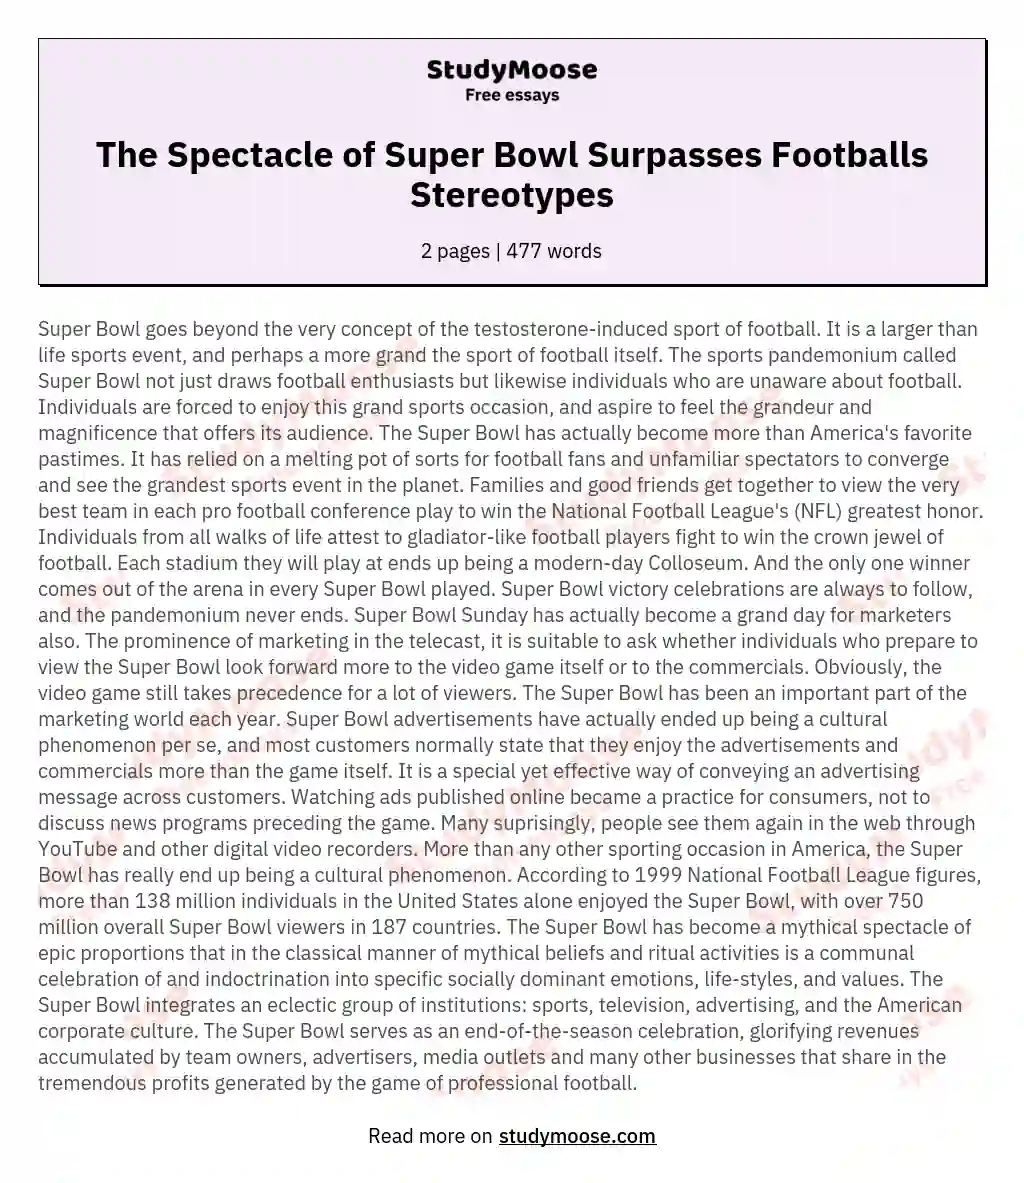 The Spectacle of Super Bowl Surpasses Footballs Stereotypes essay